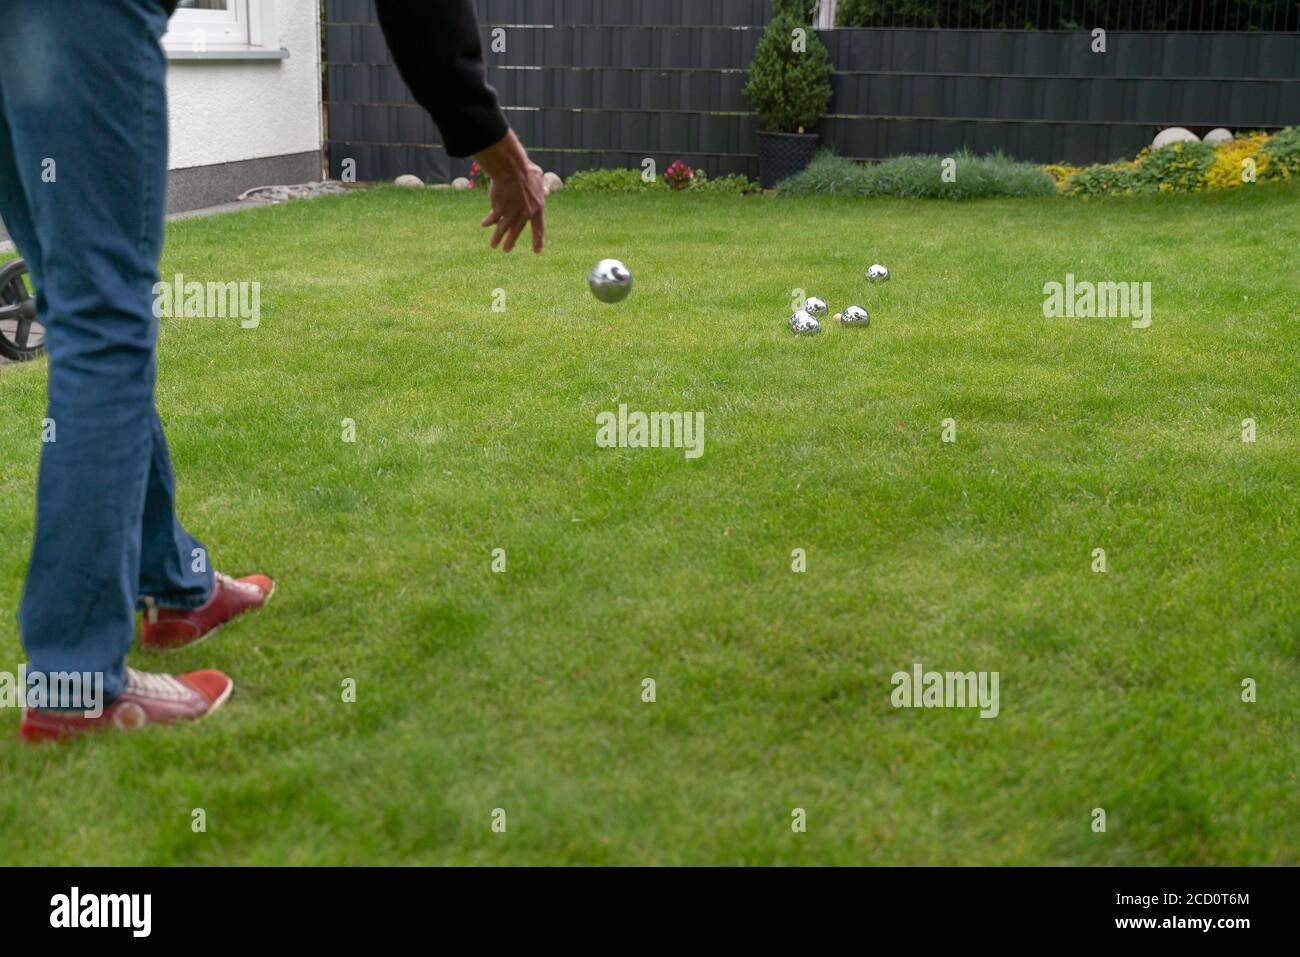 Boccia balls made of chromed steel lie on a grass surface. Woman playing boccia in the garden. Stock Photo